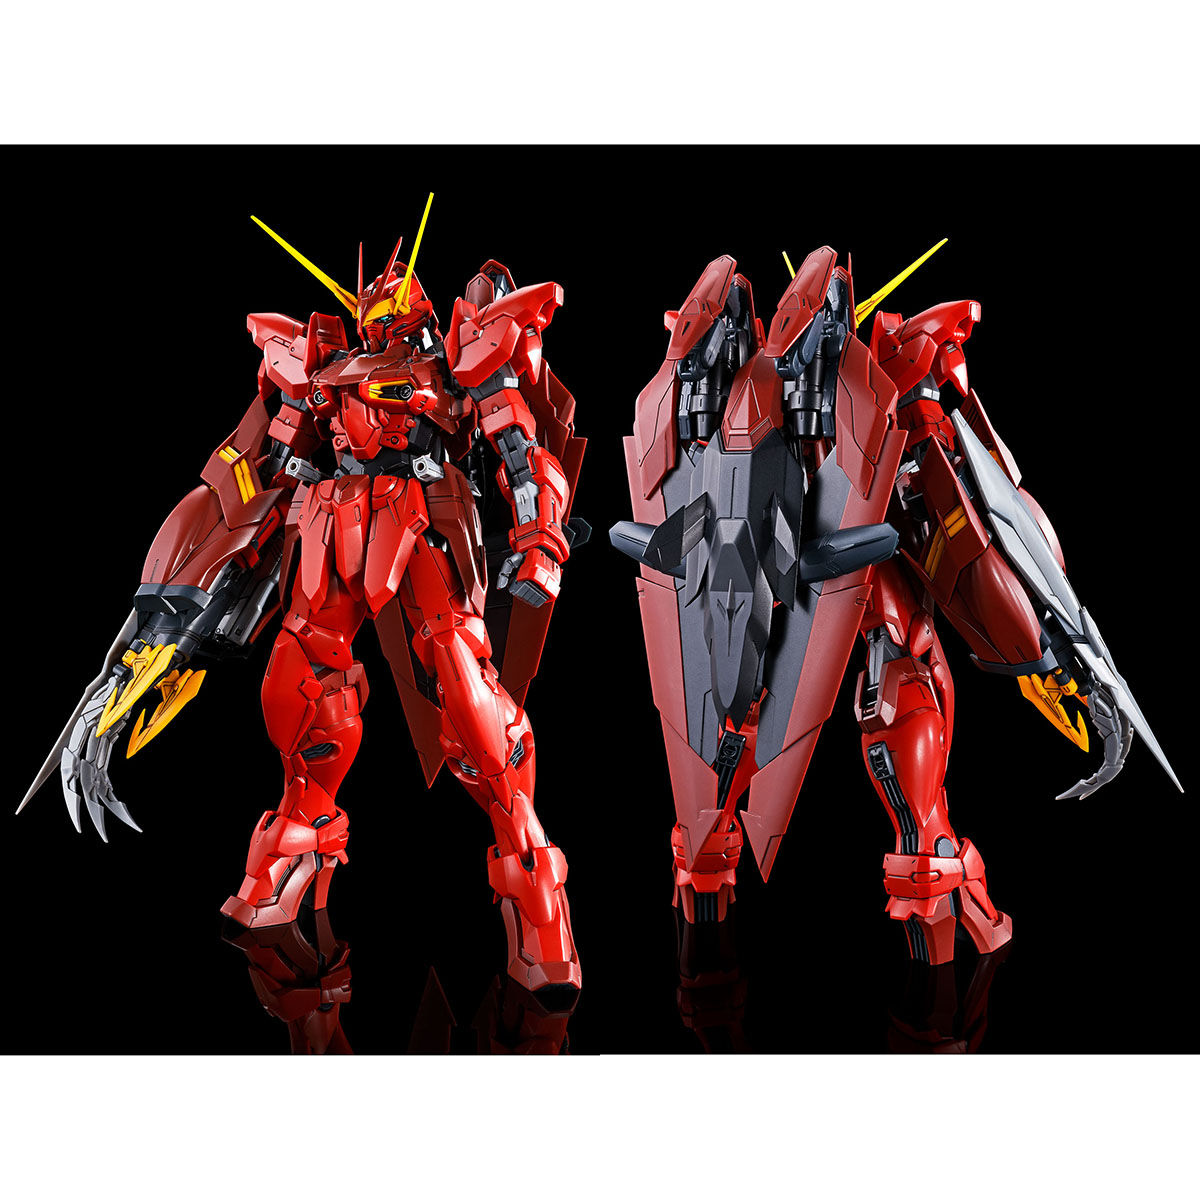 Mg 1 100 Testament Gundam Jan 21 Delivery Gundam Premium Bandai Usa Online Store For Action Figures Model Kits Toys And More